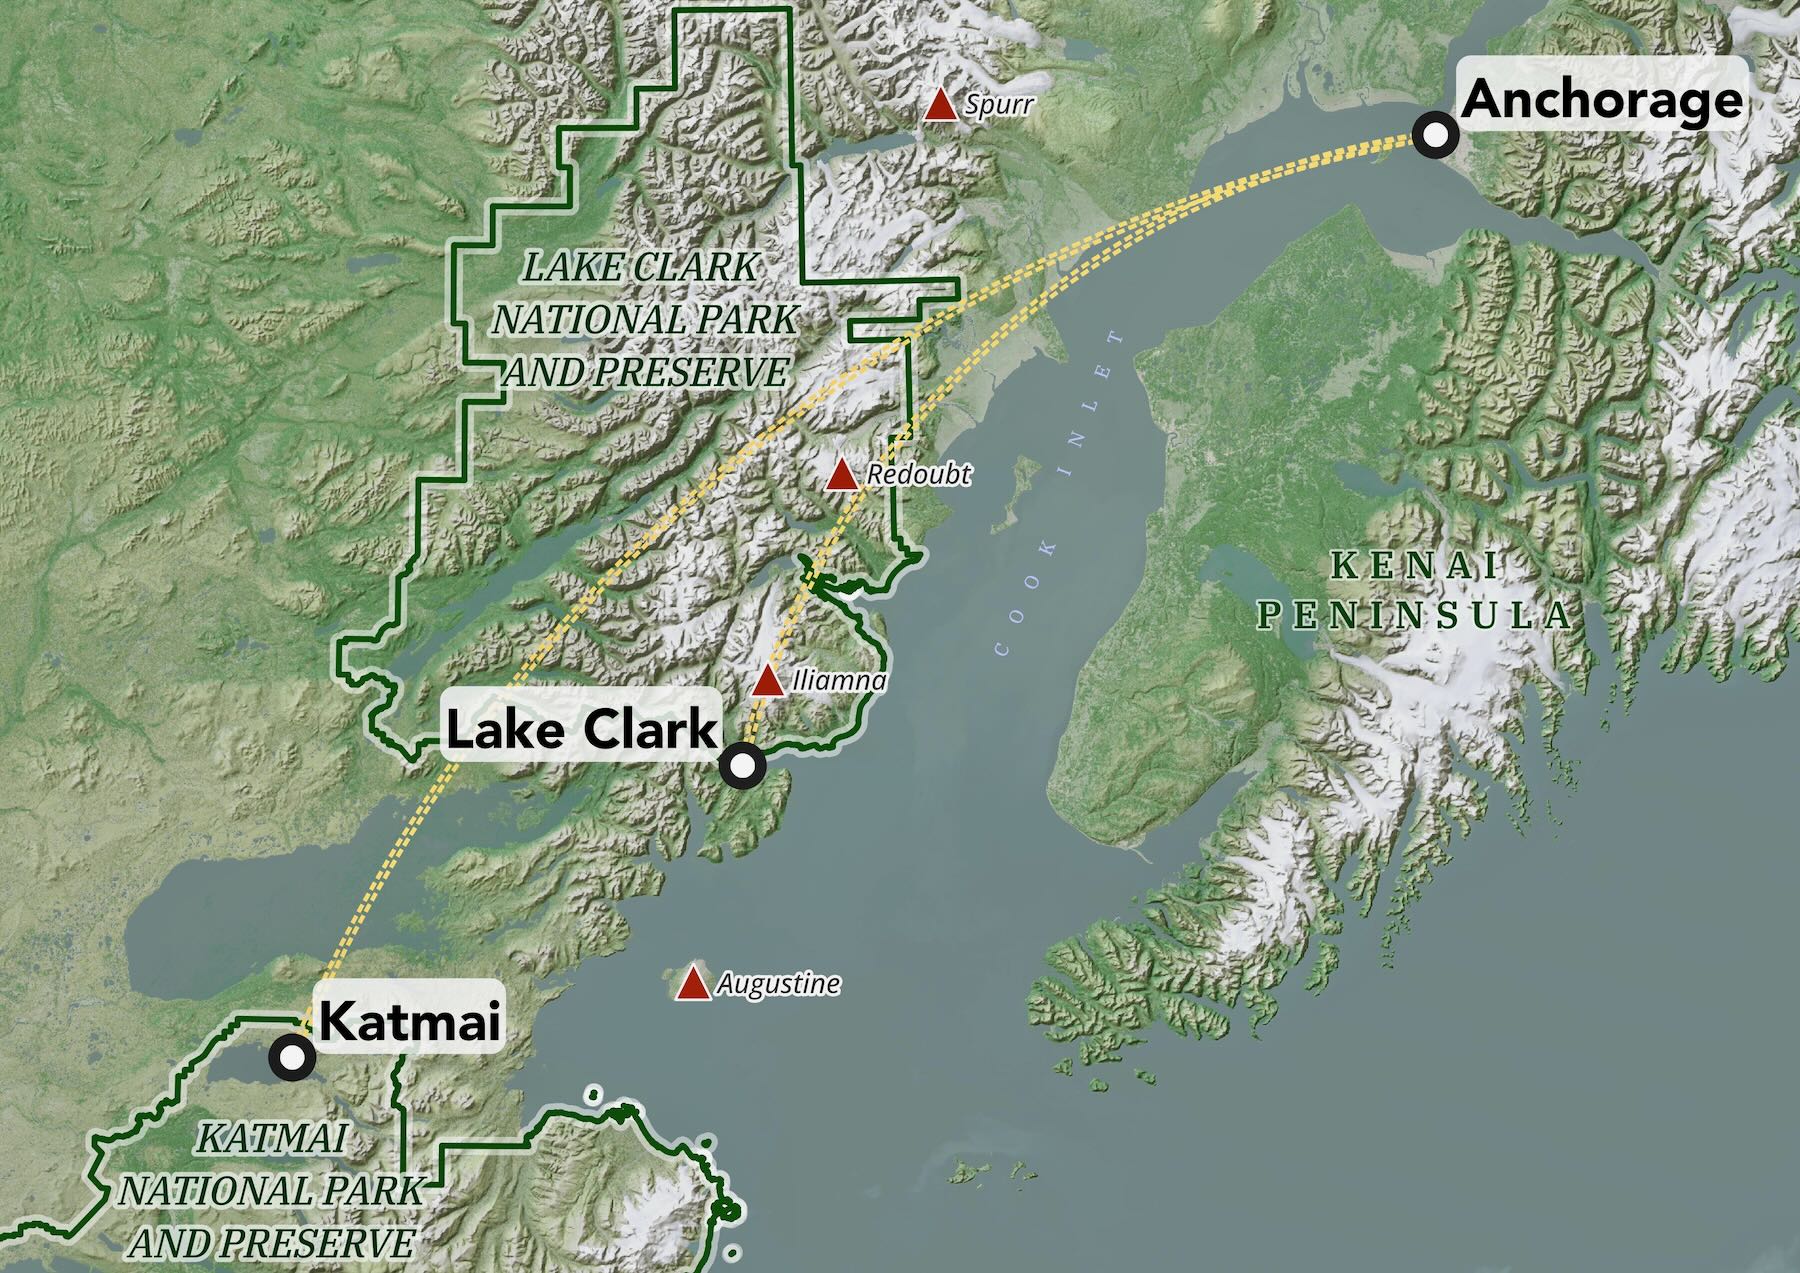 map of flight routes to bear viewing locations at katmai national park and lake clark national park